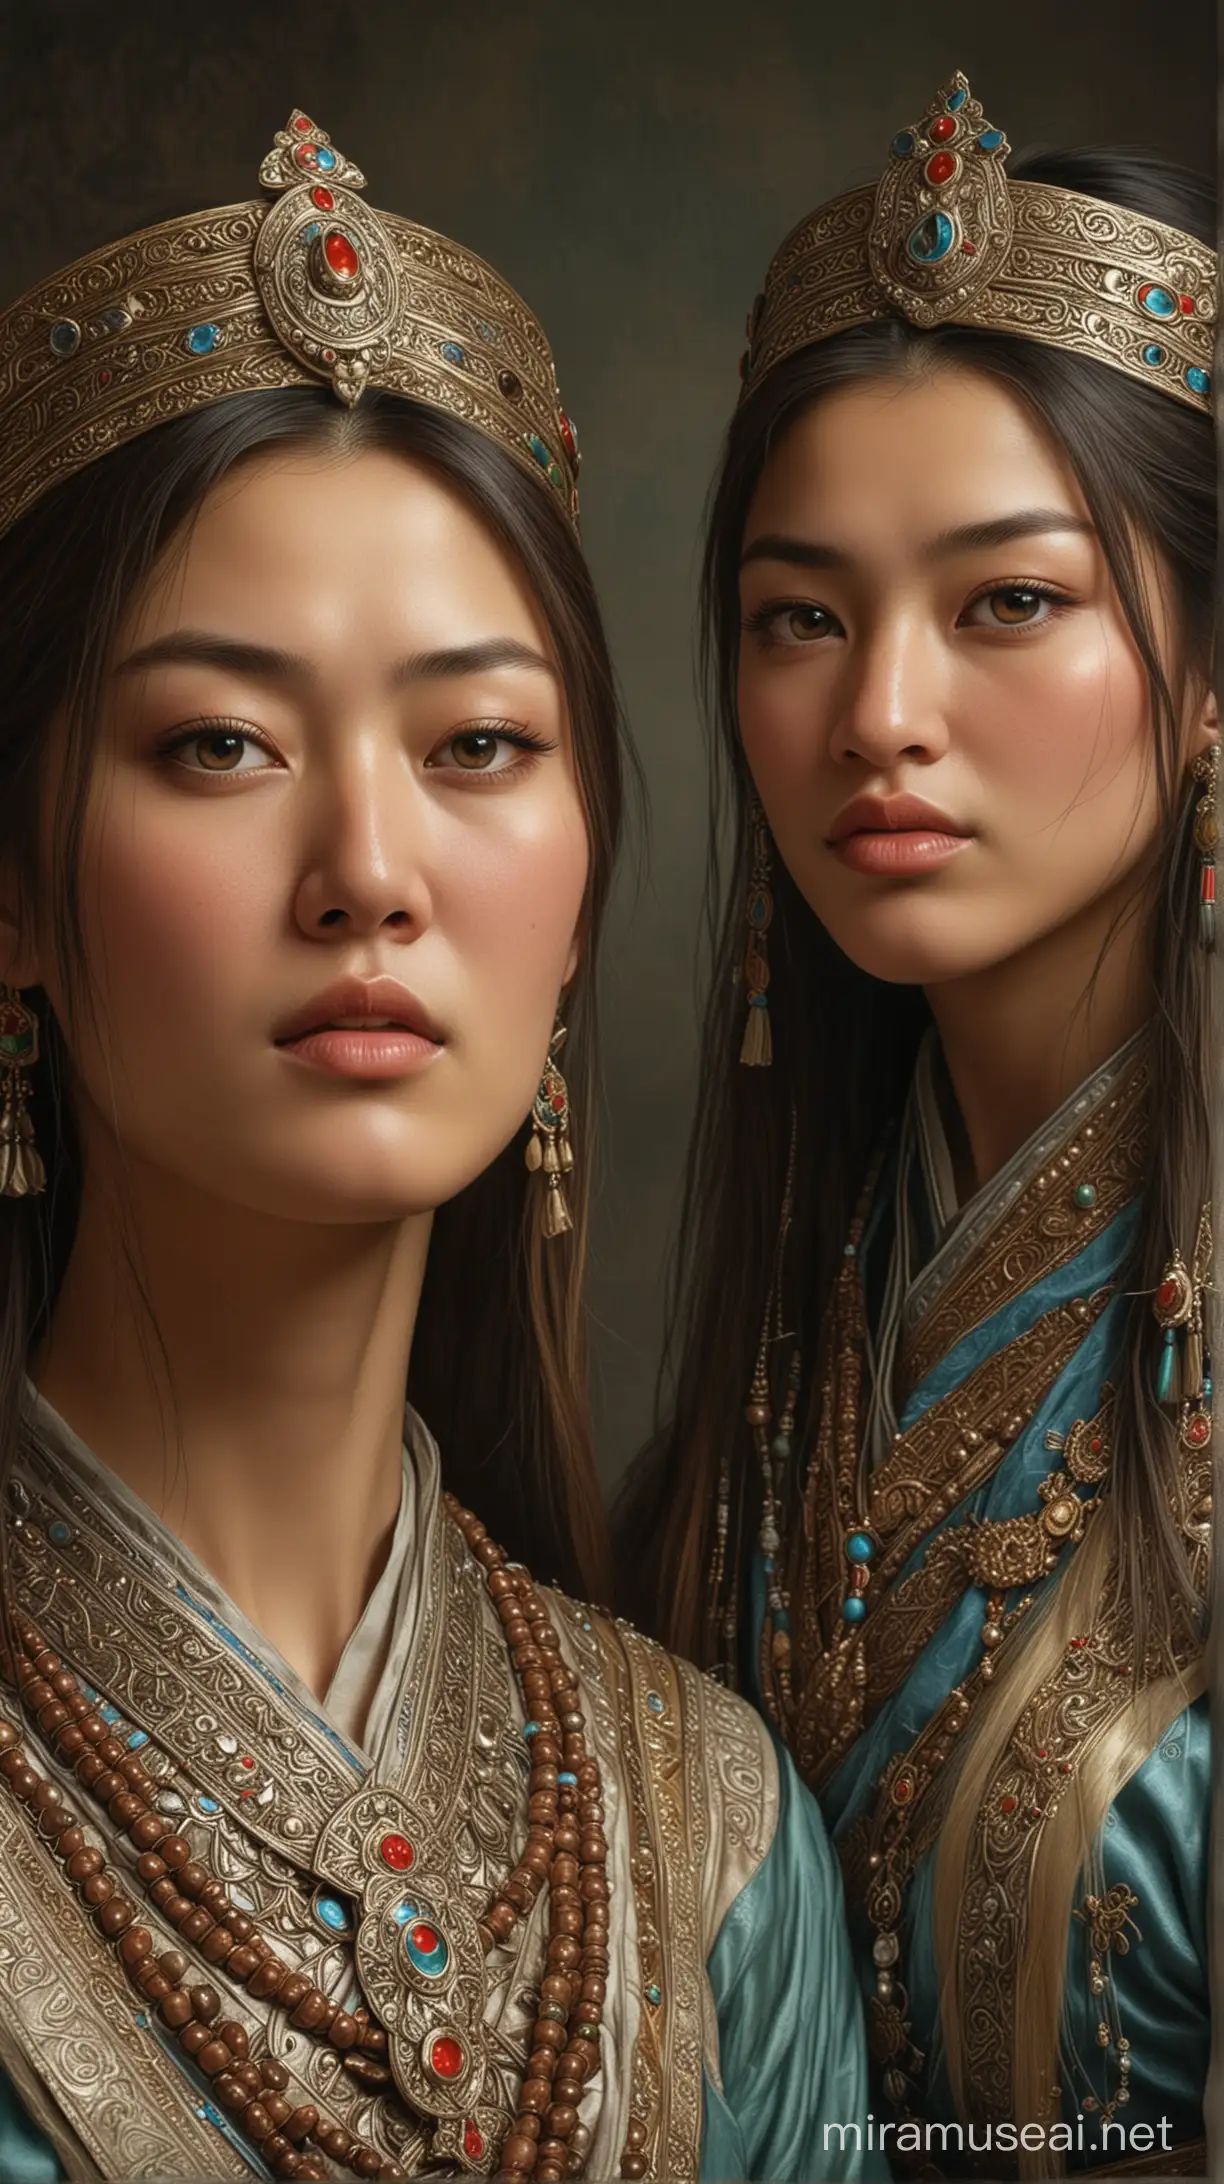 Illustration of Genghis Khan's daughters as the ultimate support system, representing the secret behind his achievements. hyper realistic